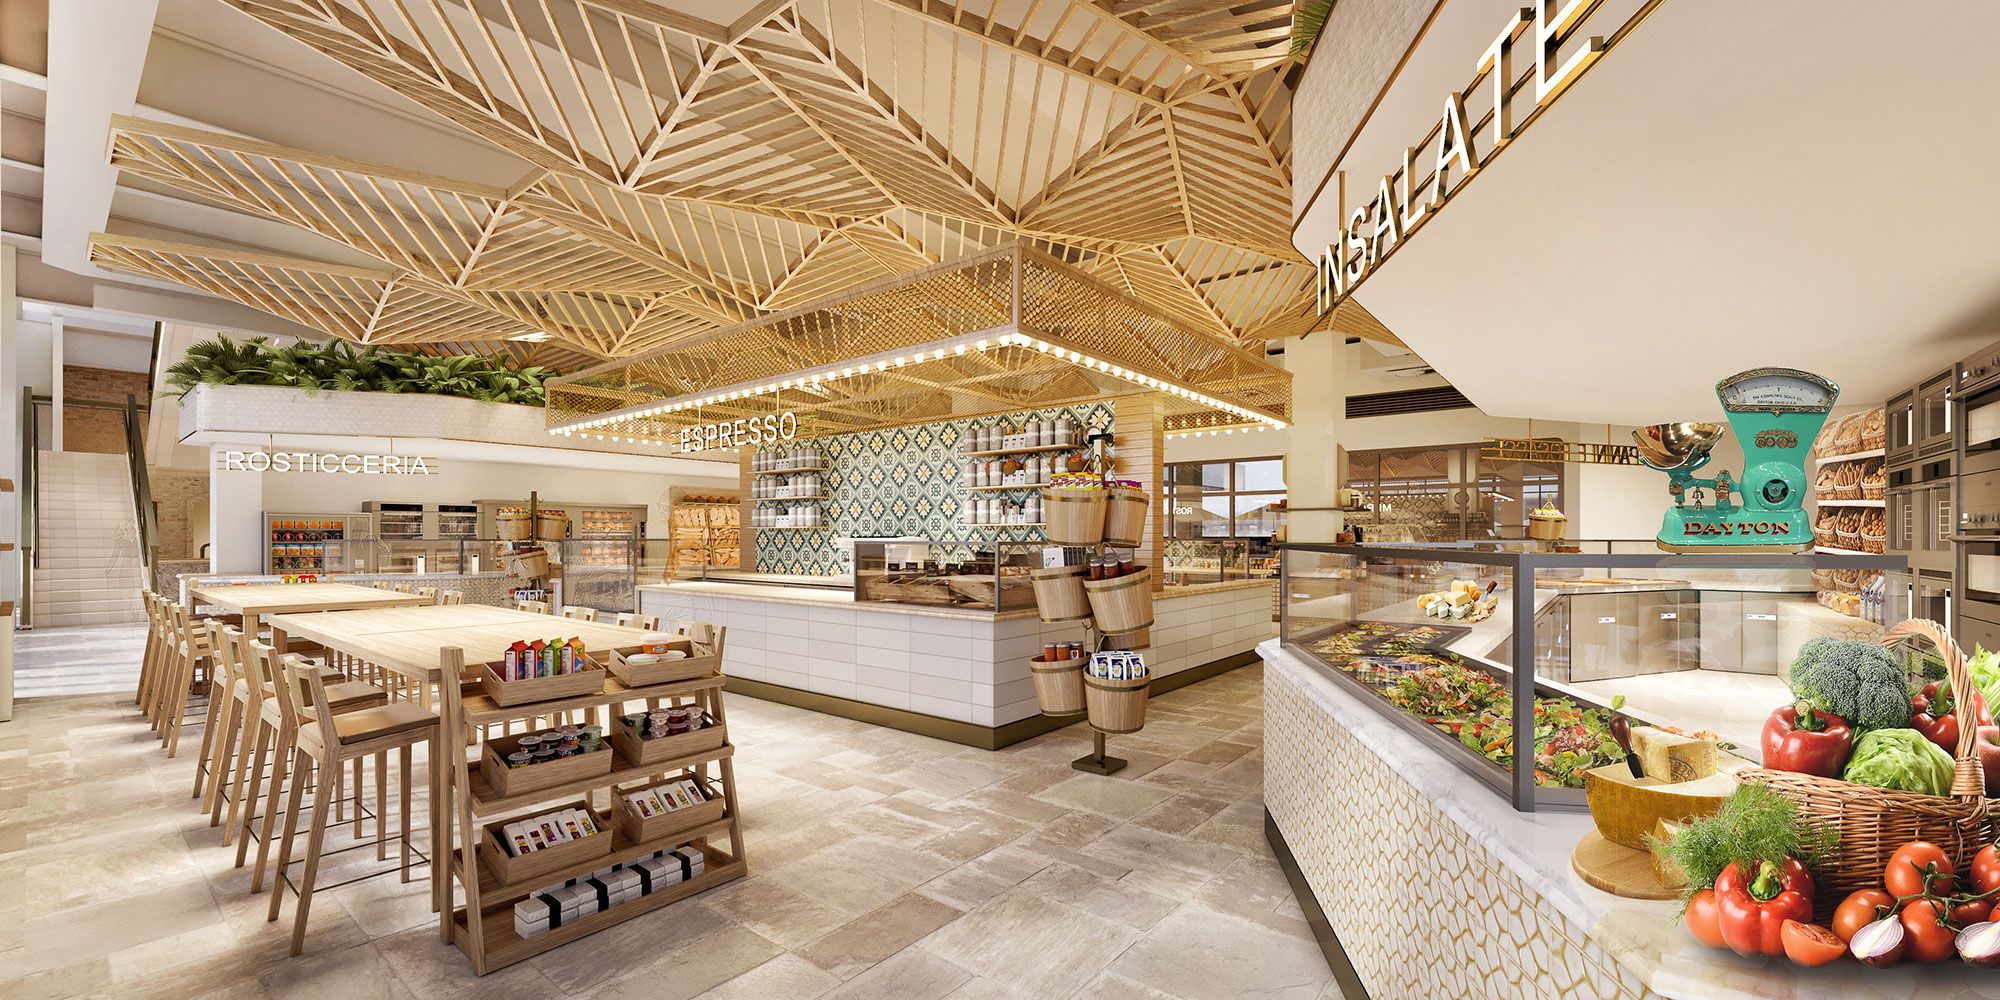 La Centrale: Elevating The Food Hall Experience With Light